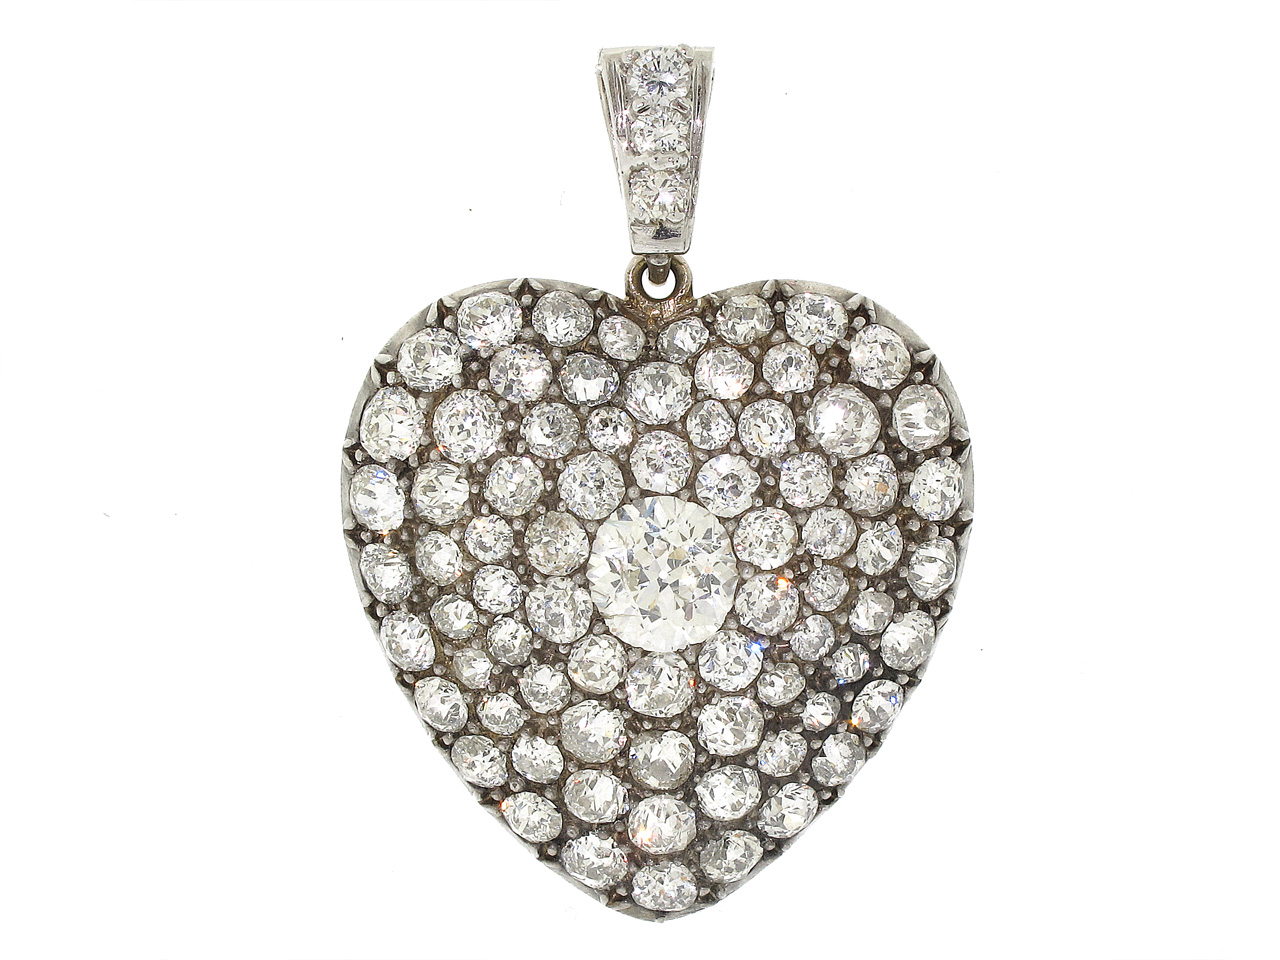 Antique Victorian Diamond Heart Pendant in Silver and Gold